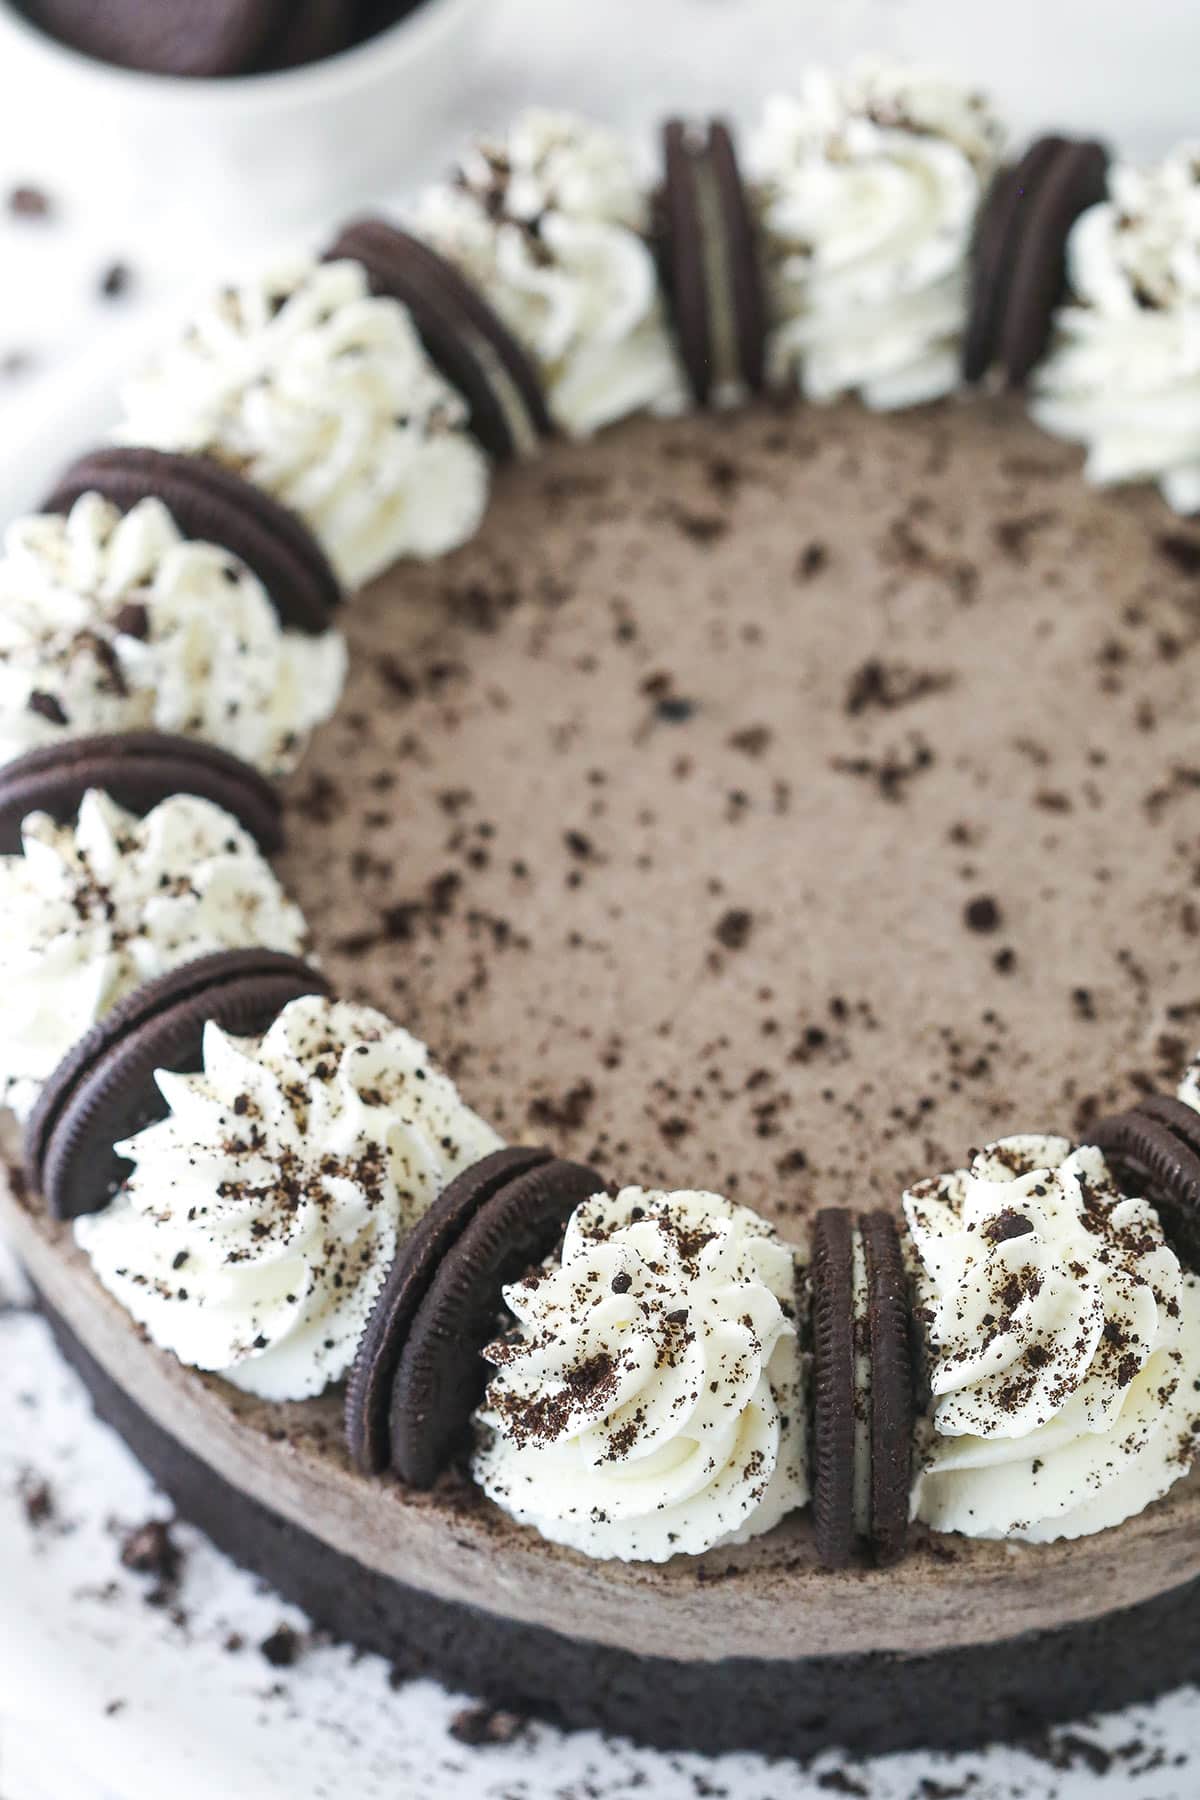 Top view of a no bake oreo cheesecake decorated with whipped cream and cookies